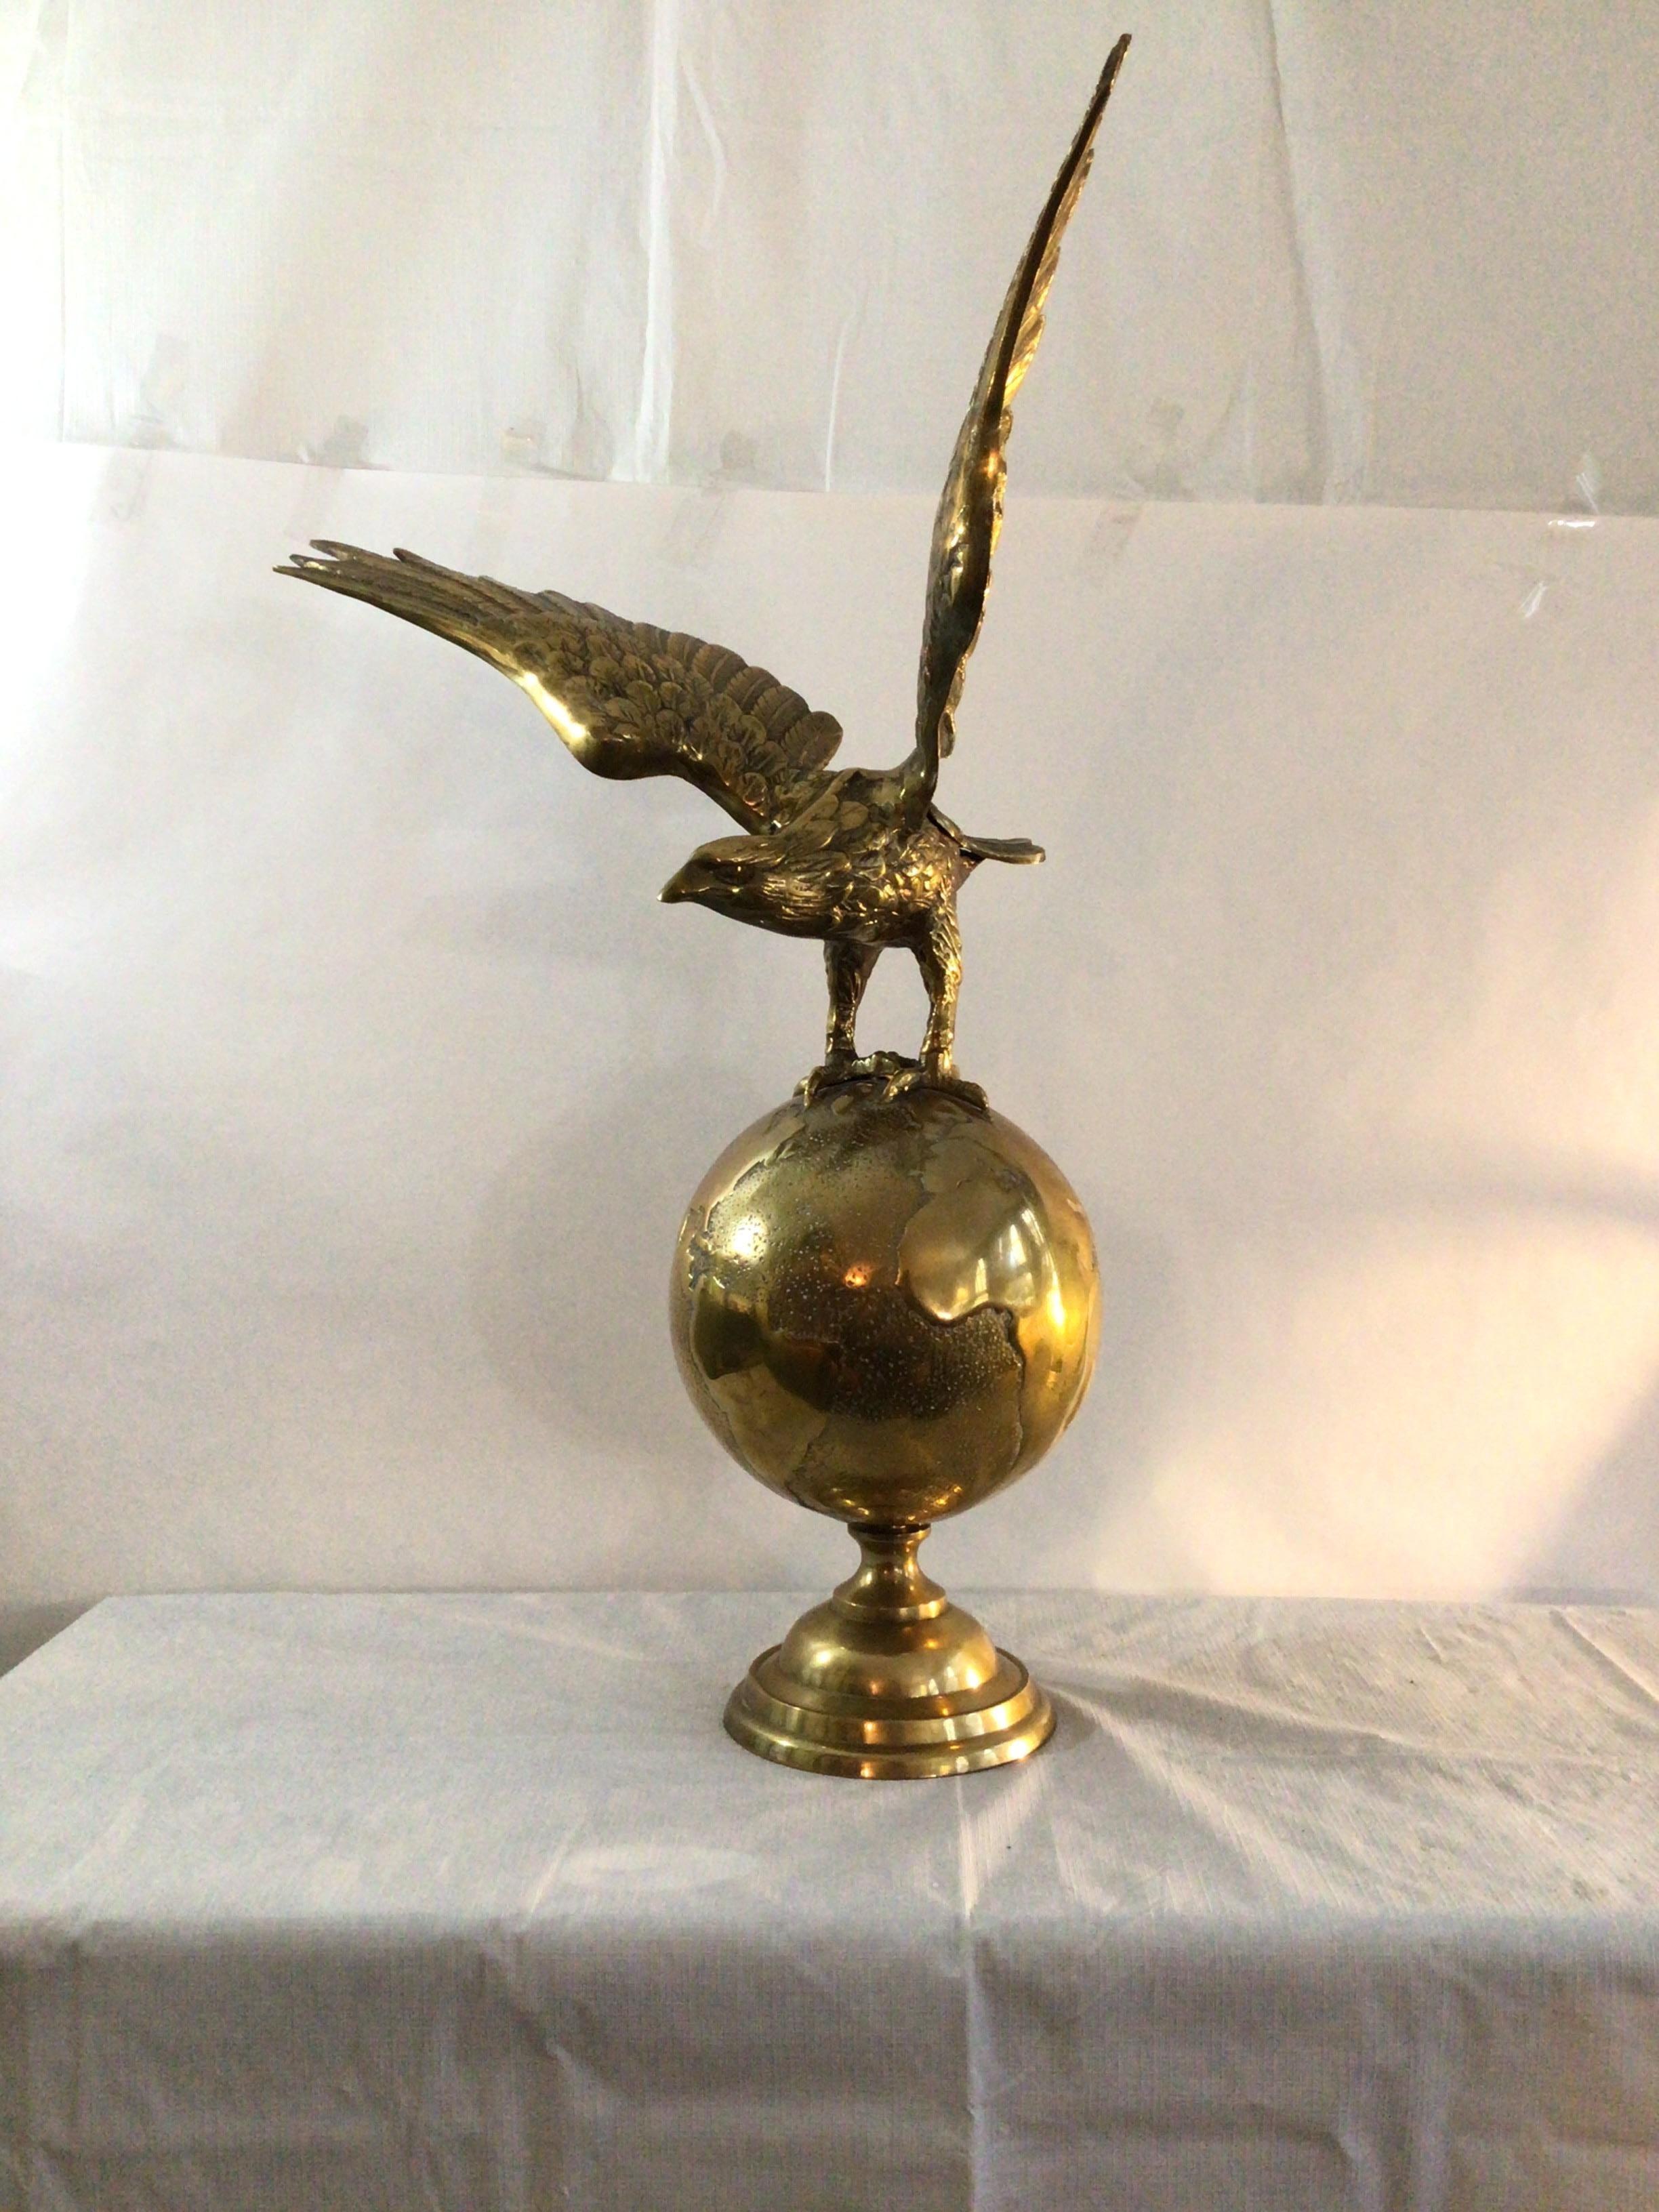 1970s Solid Cast Brass Eagle on World Statue
Little crack in the wing (as shown in picture).